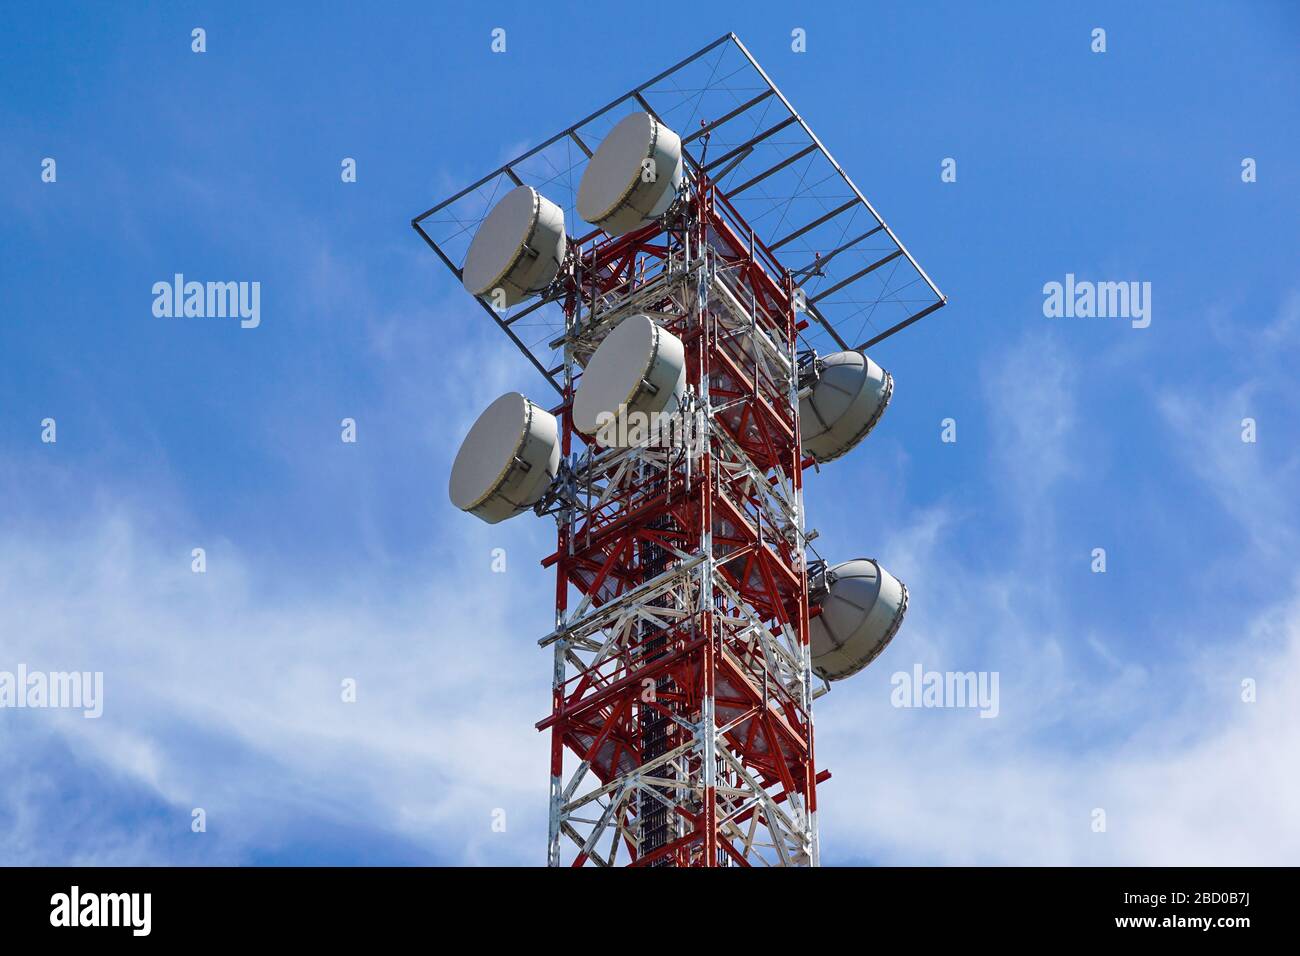 Telecommunication tower with a sunlight. Used to transmit television signals. Stock Photo